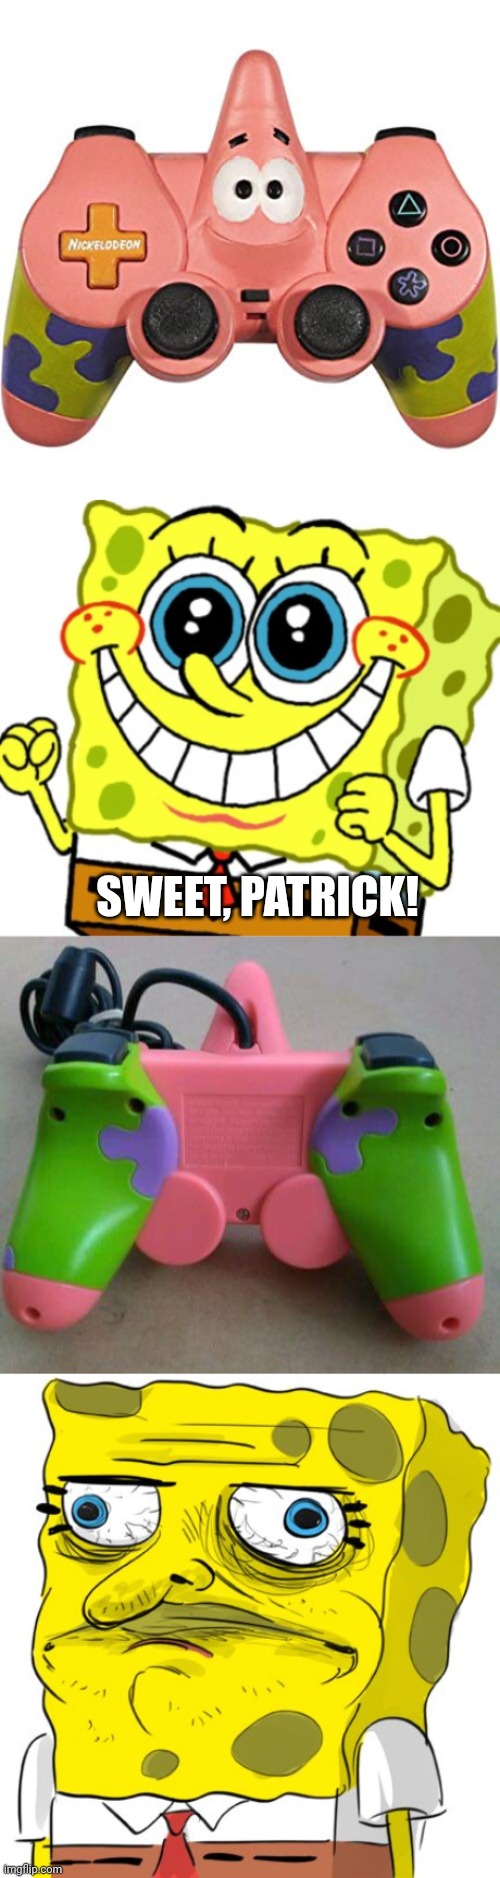 DON'T TOUCH THE BACK | SWEET, PATRICK! | image tagged in spongebob,patrick star,spongebob squarepants,playstation,video games | made w/ Imgflip meme maker